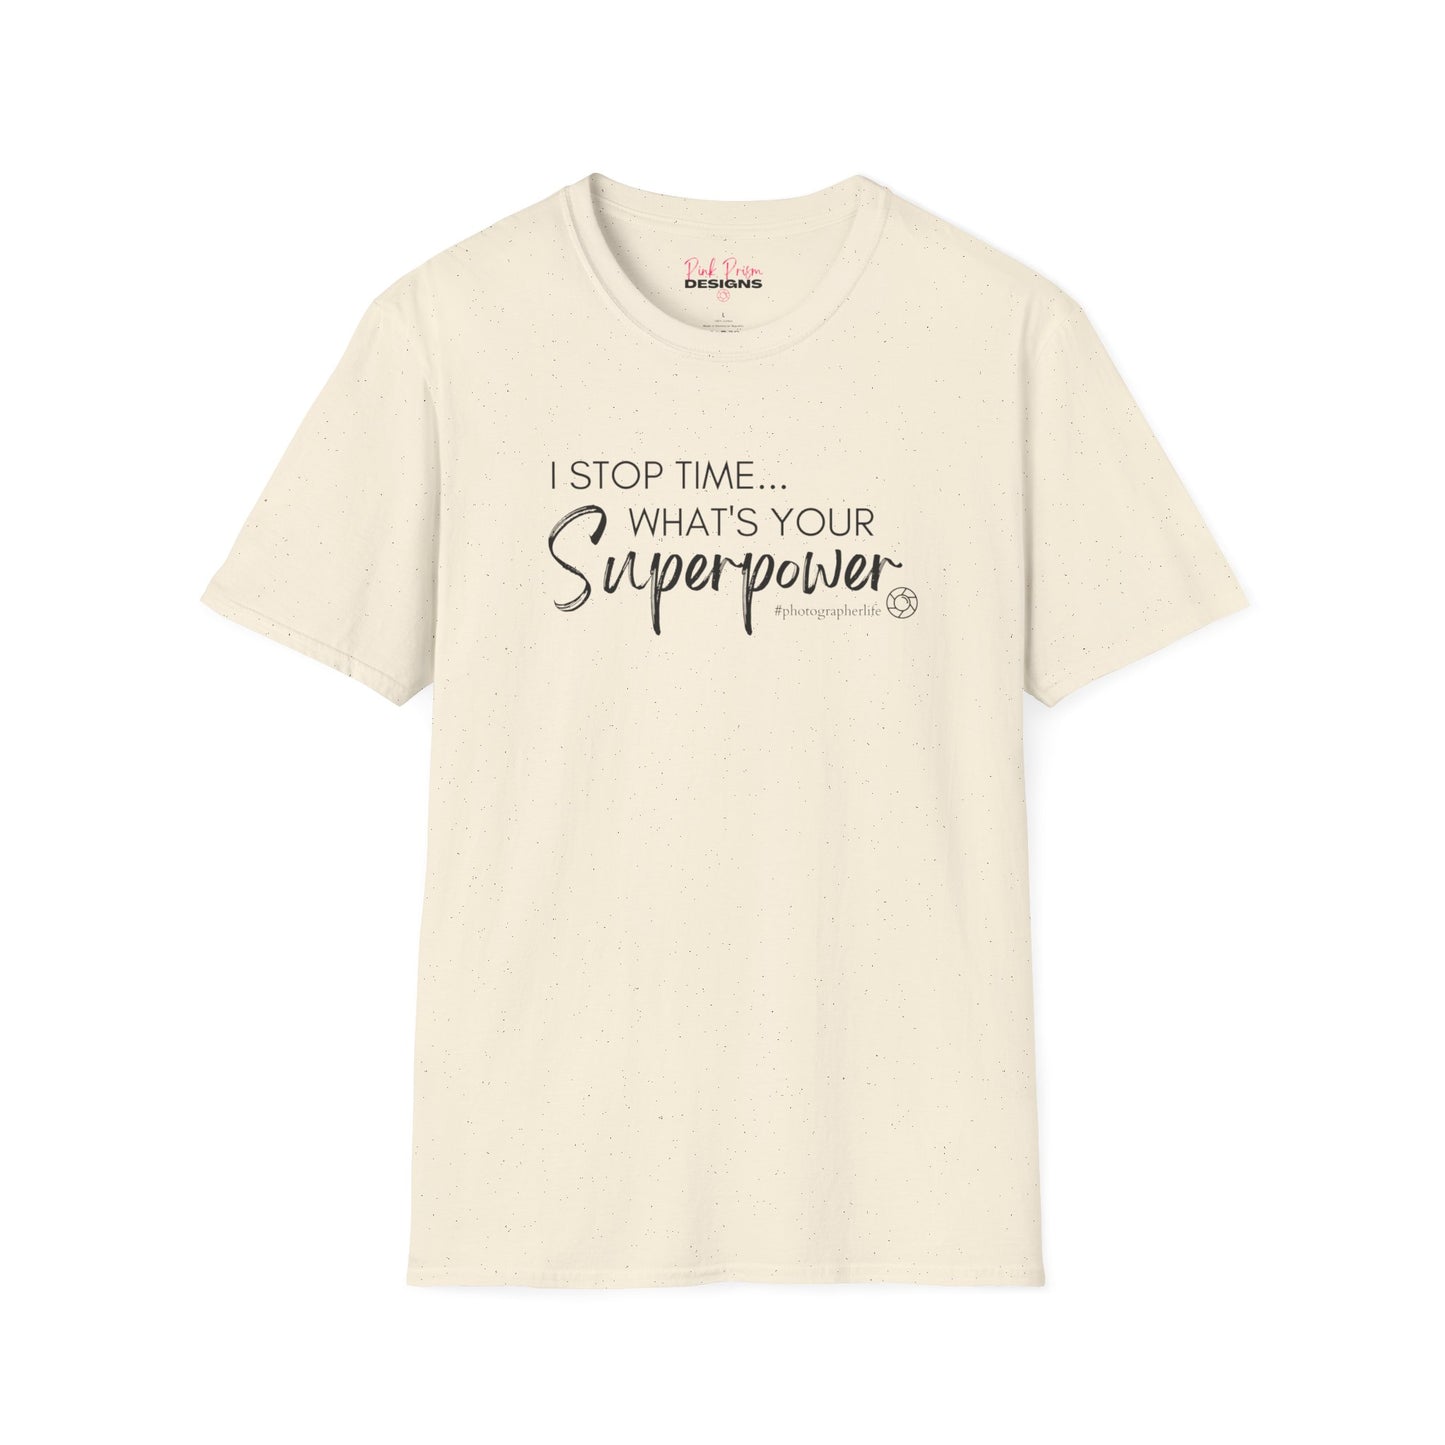 Superpower - Softstyle T-Shirt